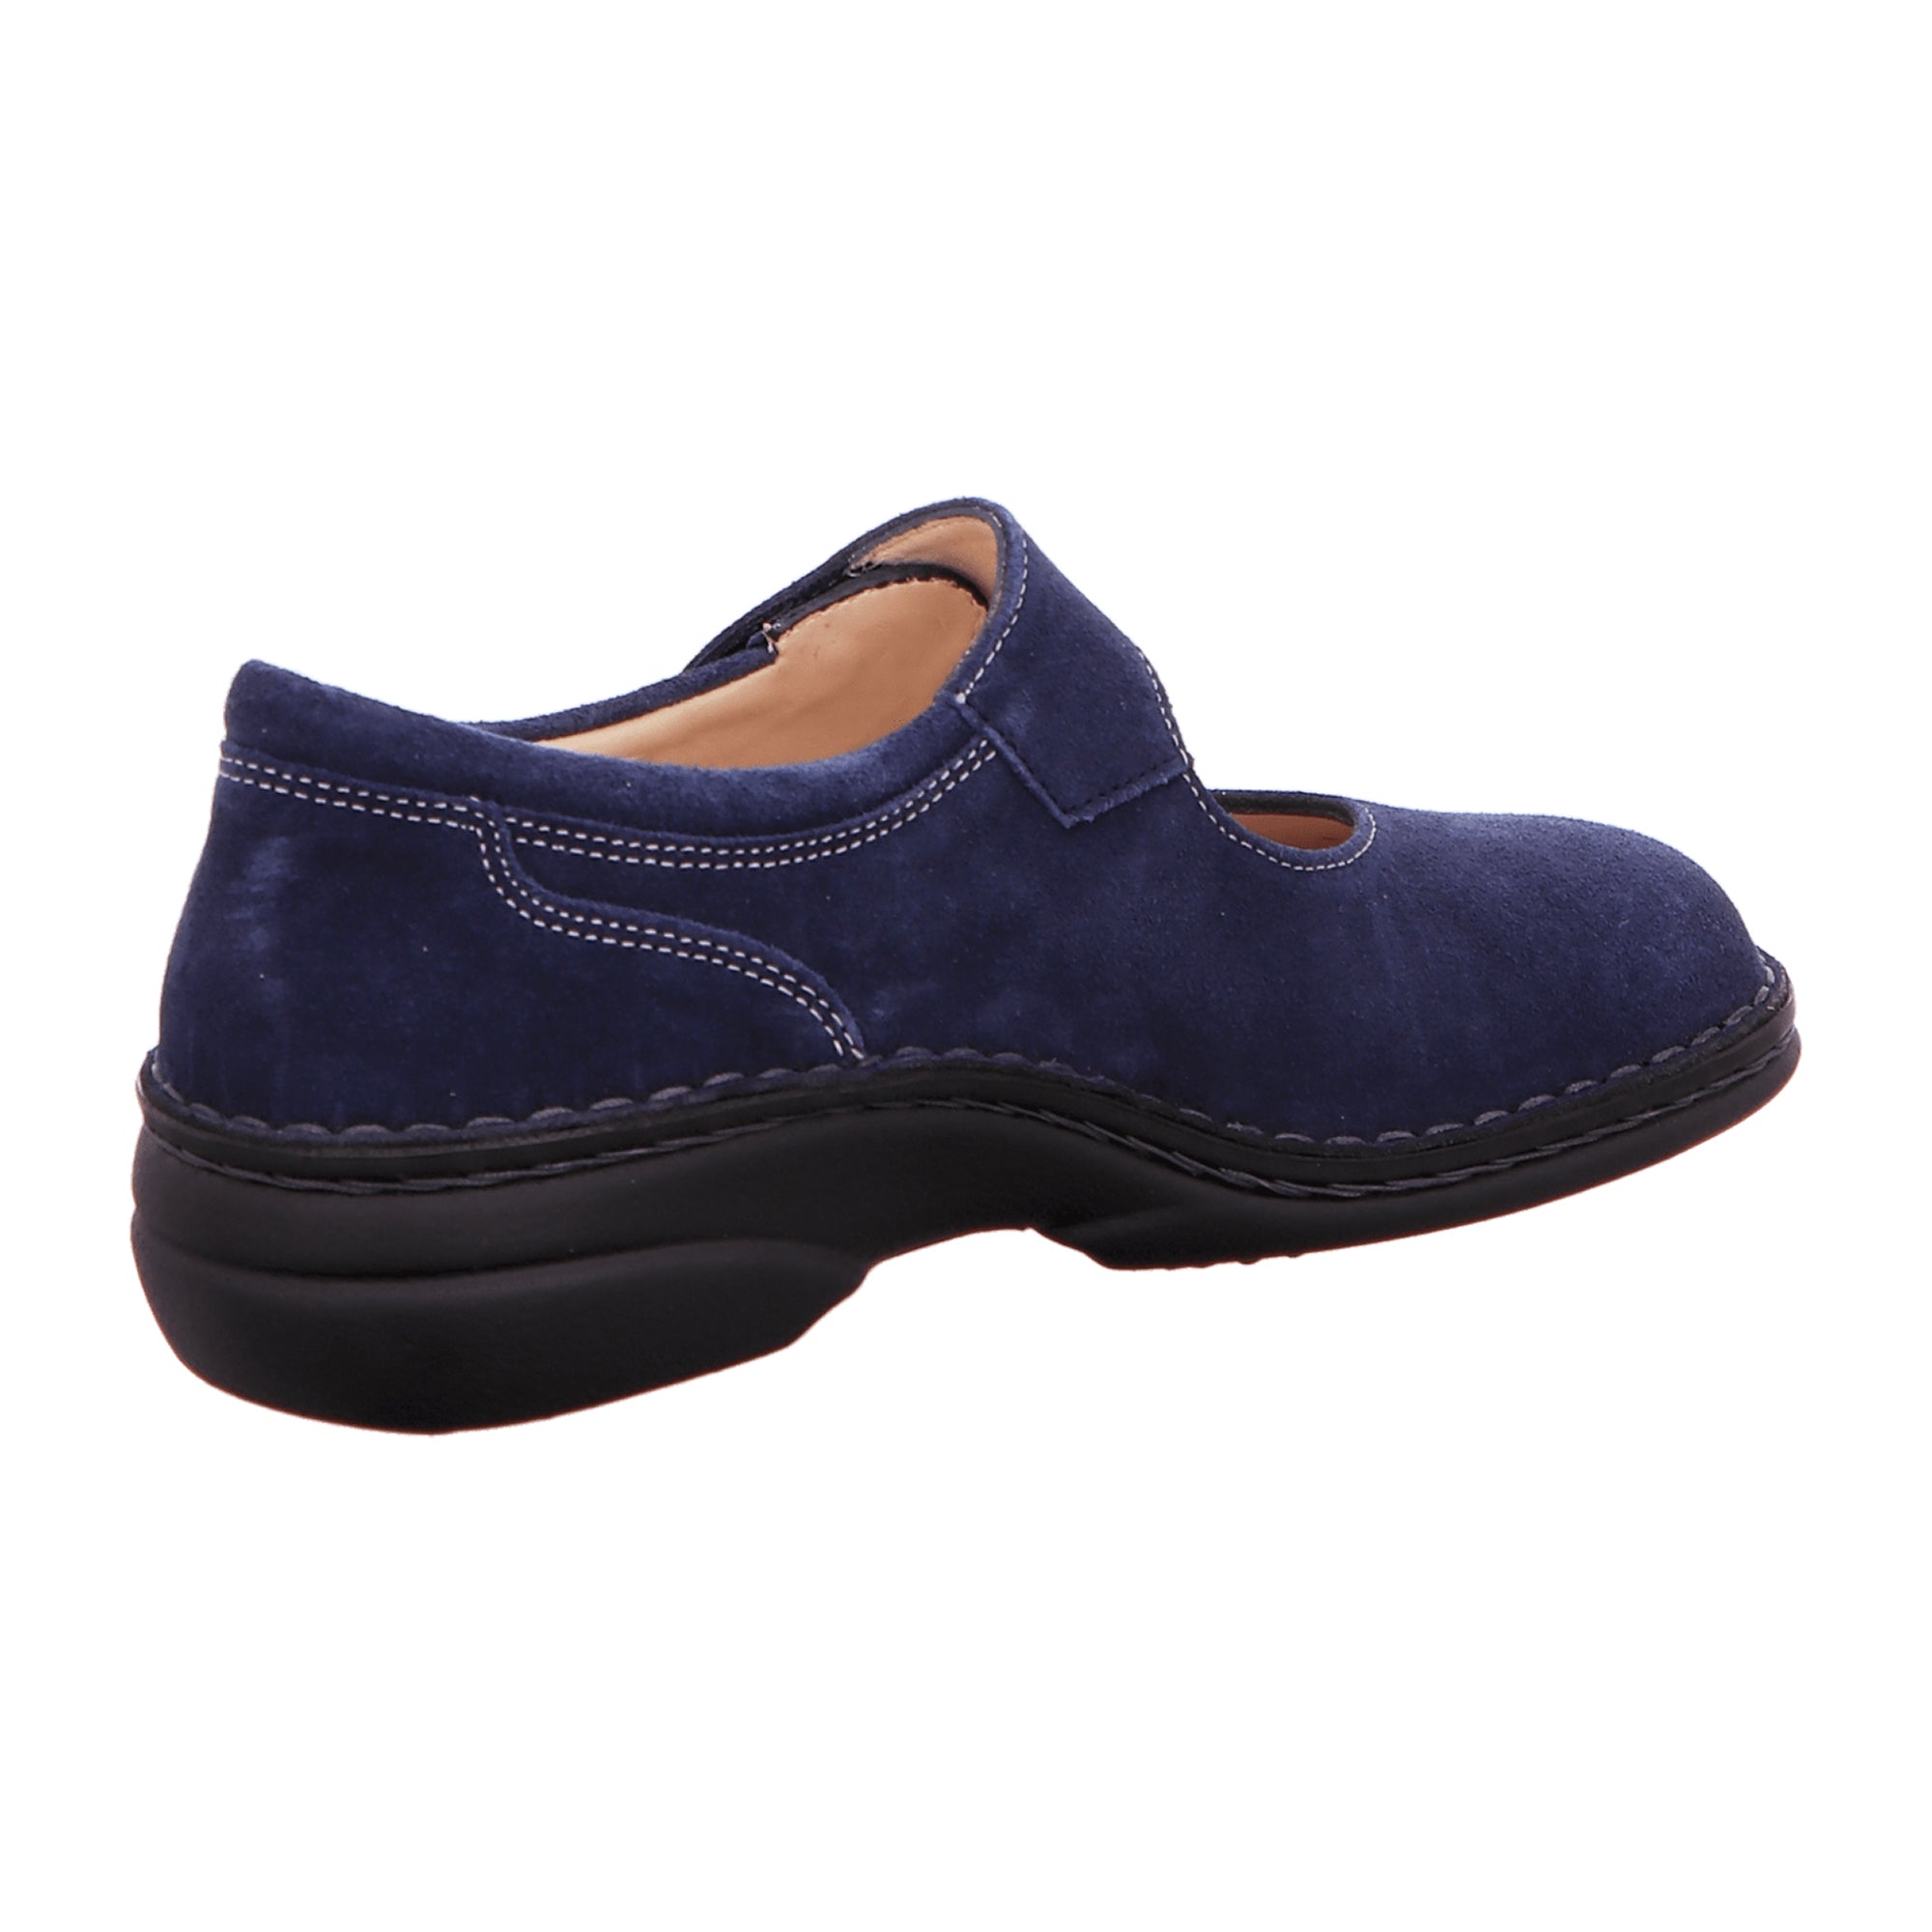 Finn Comfort Laval Women's Slipper - Indigo Blue Comfortable Leather Slip-On Shoe with Removable Insole